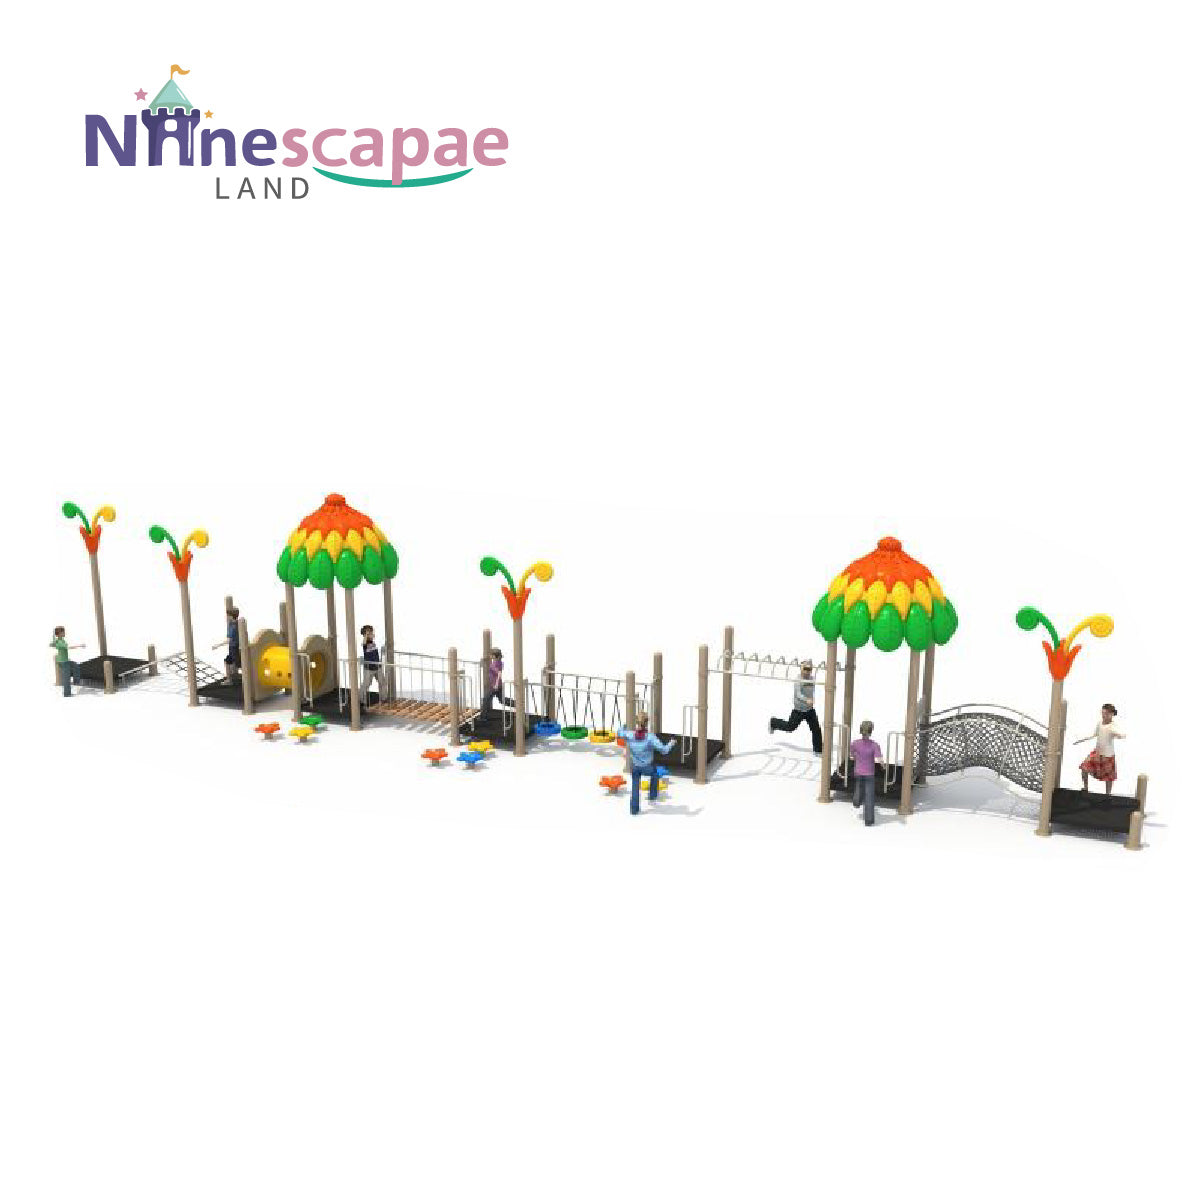 Outdoor Play Equipment Parts - NinescapeLand